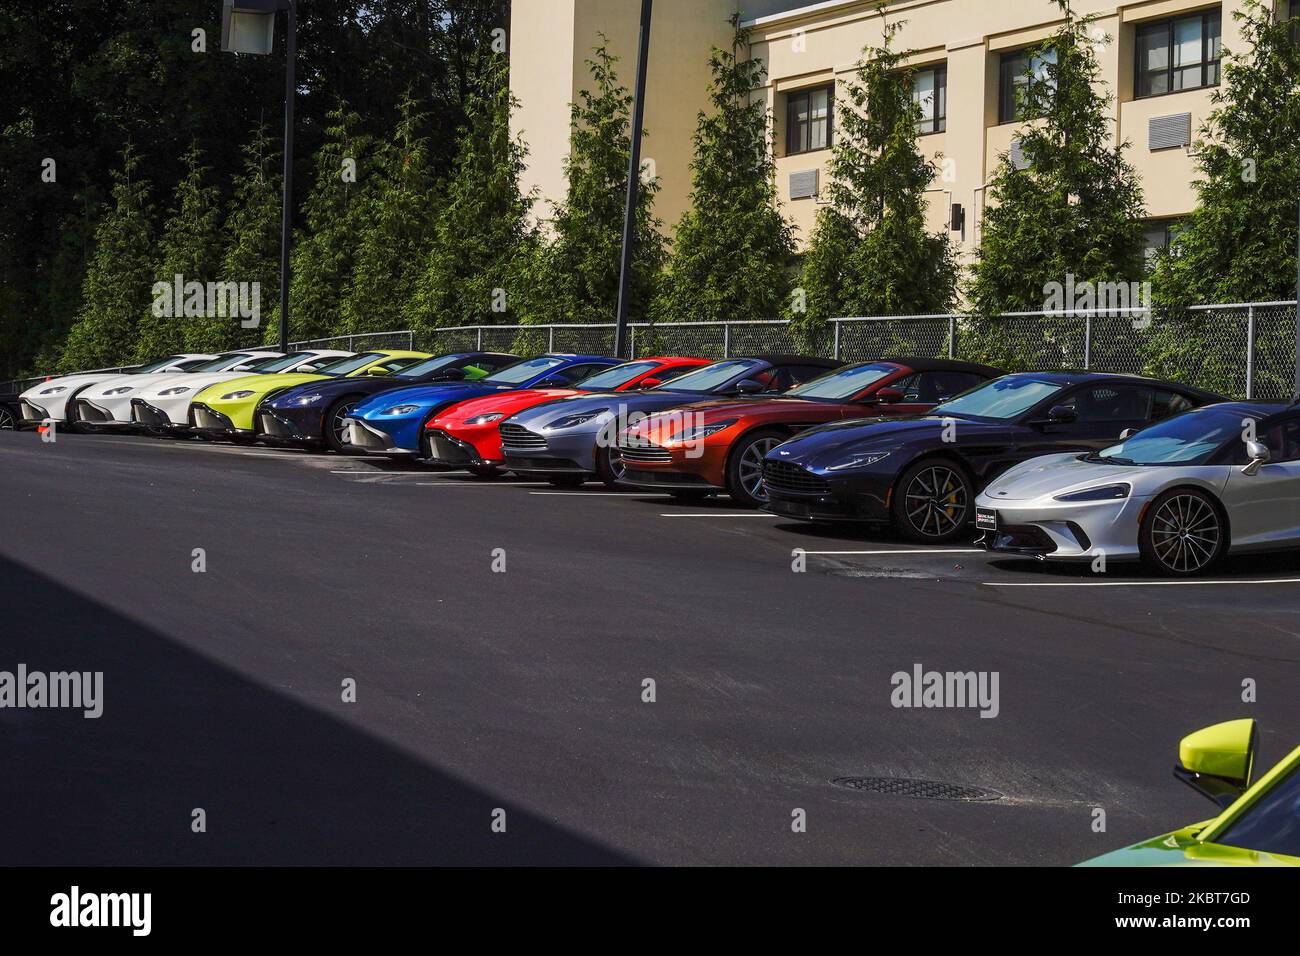 A view of McLaren dealership in Queens, New York, USA., on July 4, 2020. (Photo by John Nacion/NurPhoto) Stock Photo